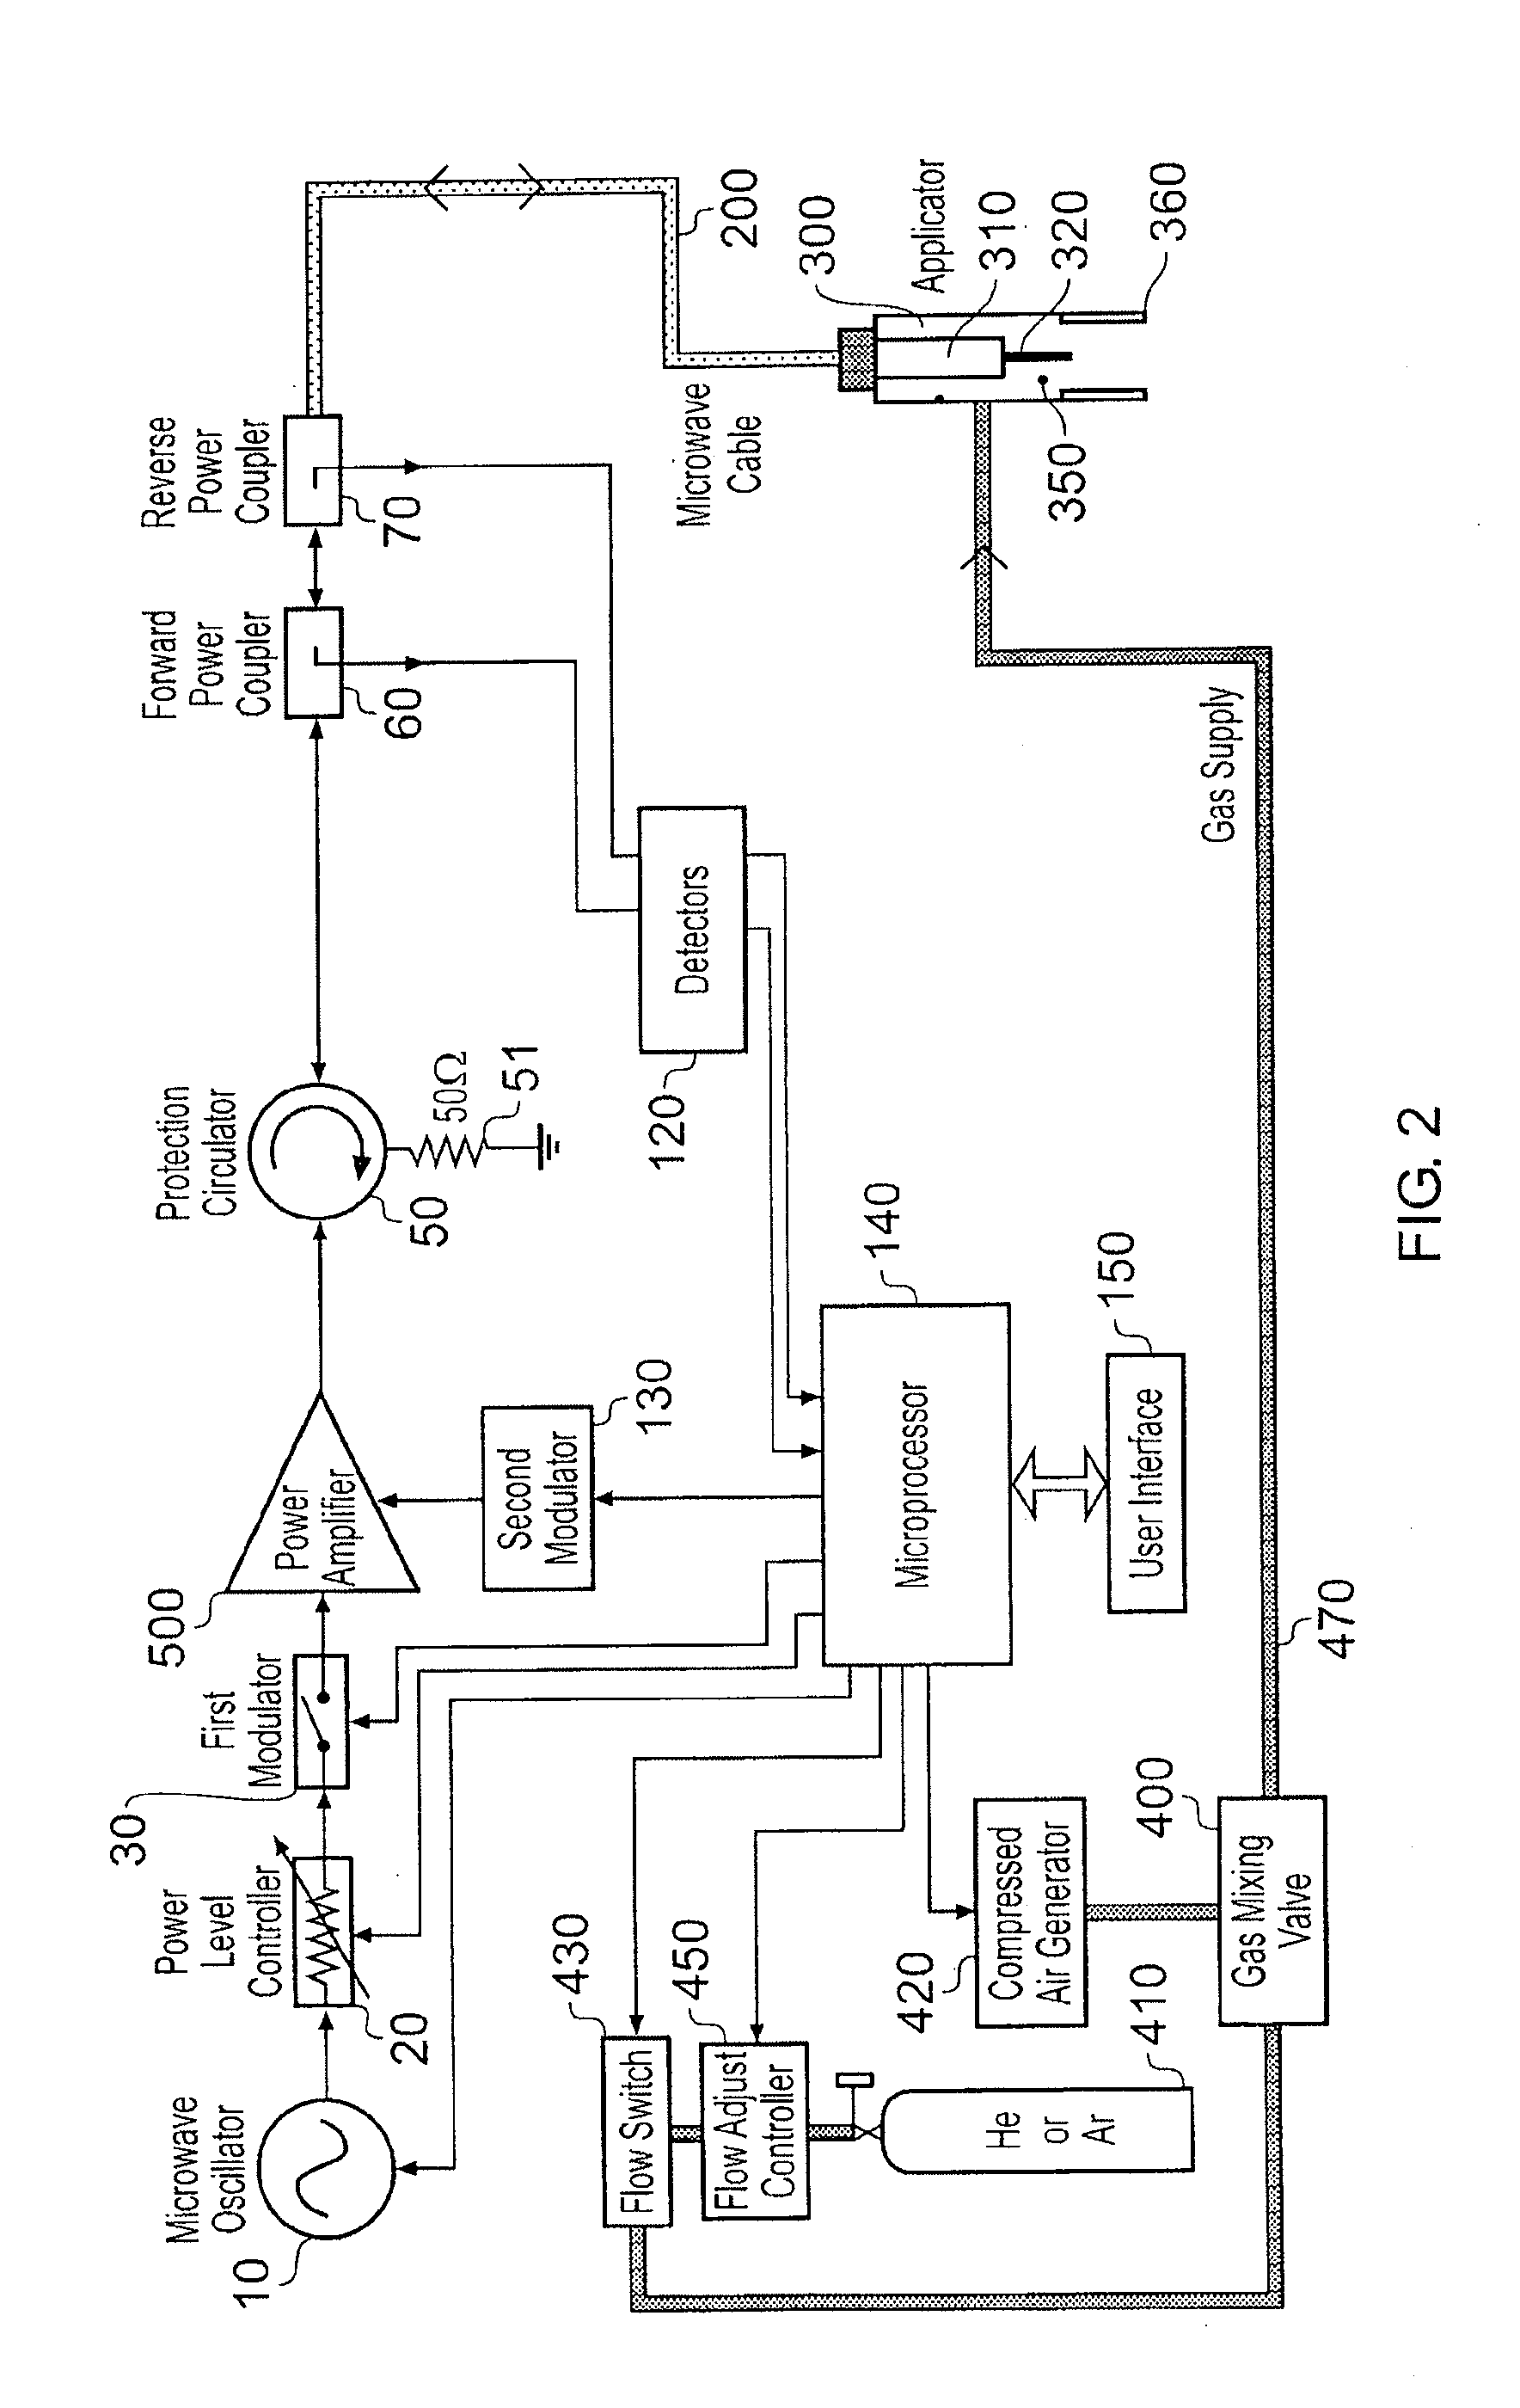 Microwave plasma sterilisation system and applicators therefor